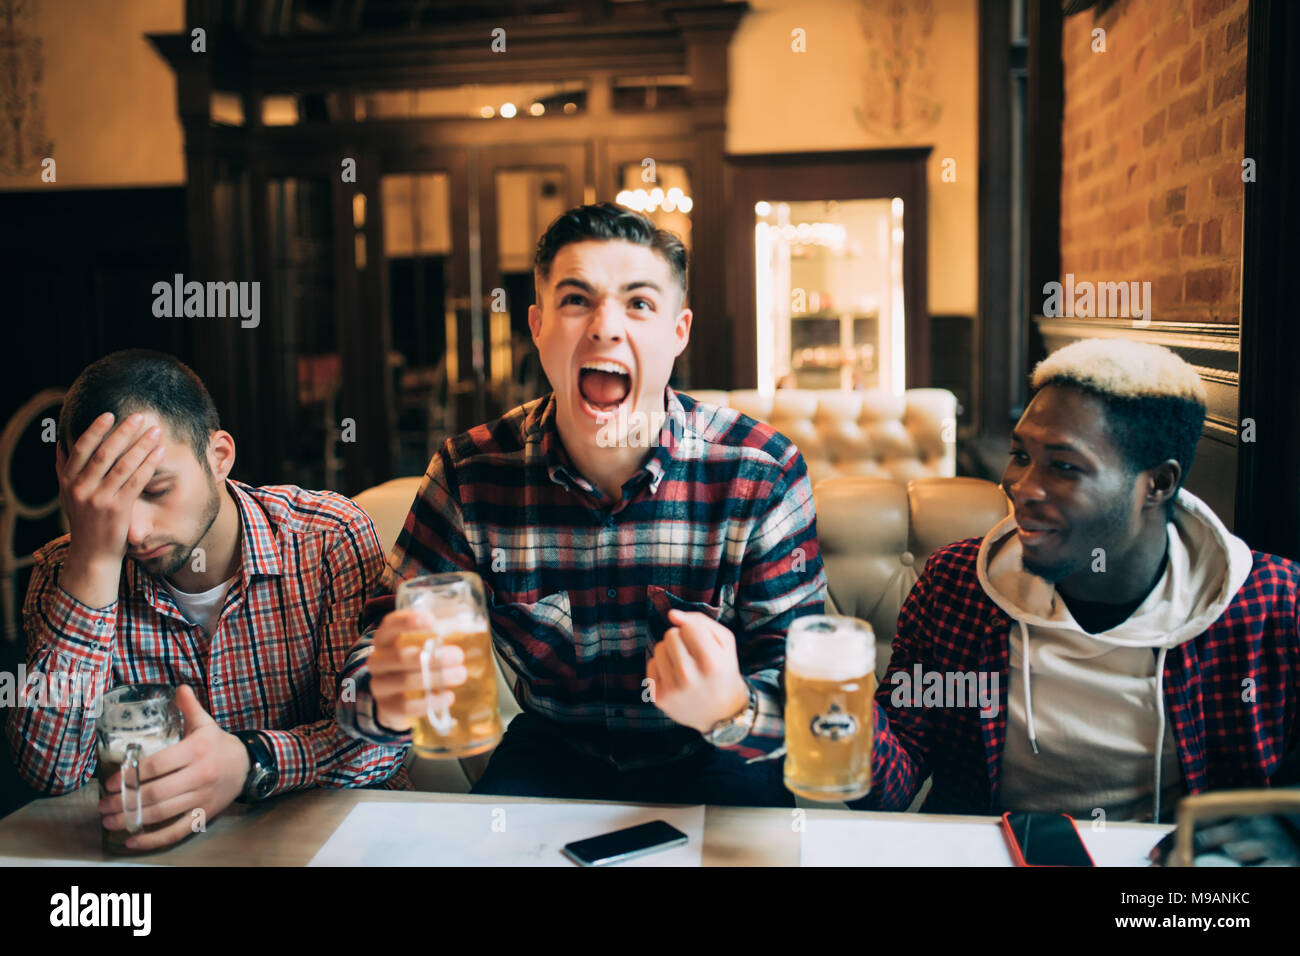 Watching TV in bar. Two happy young men drinking beer and gesturing while sitting in bar Stock Photo